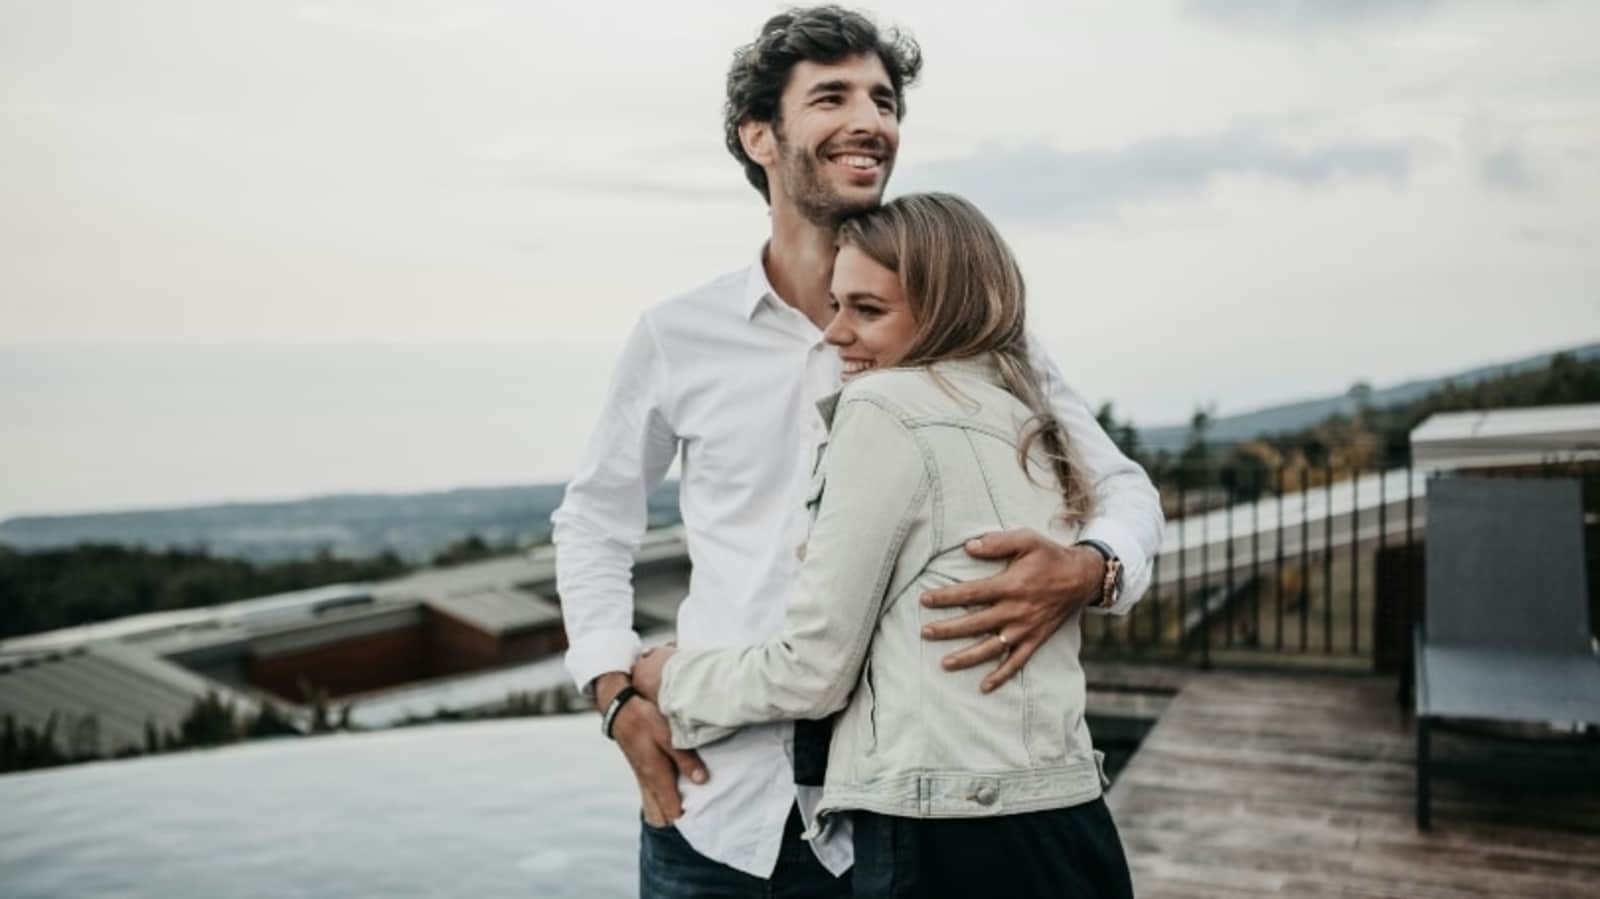 From love bombing to low self-esteem: 6 common reasons you might attach too early in dating